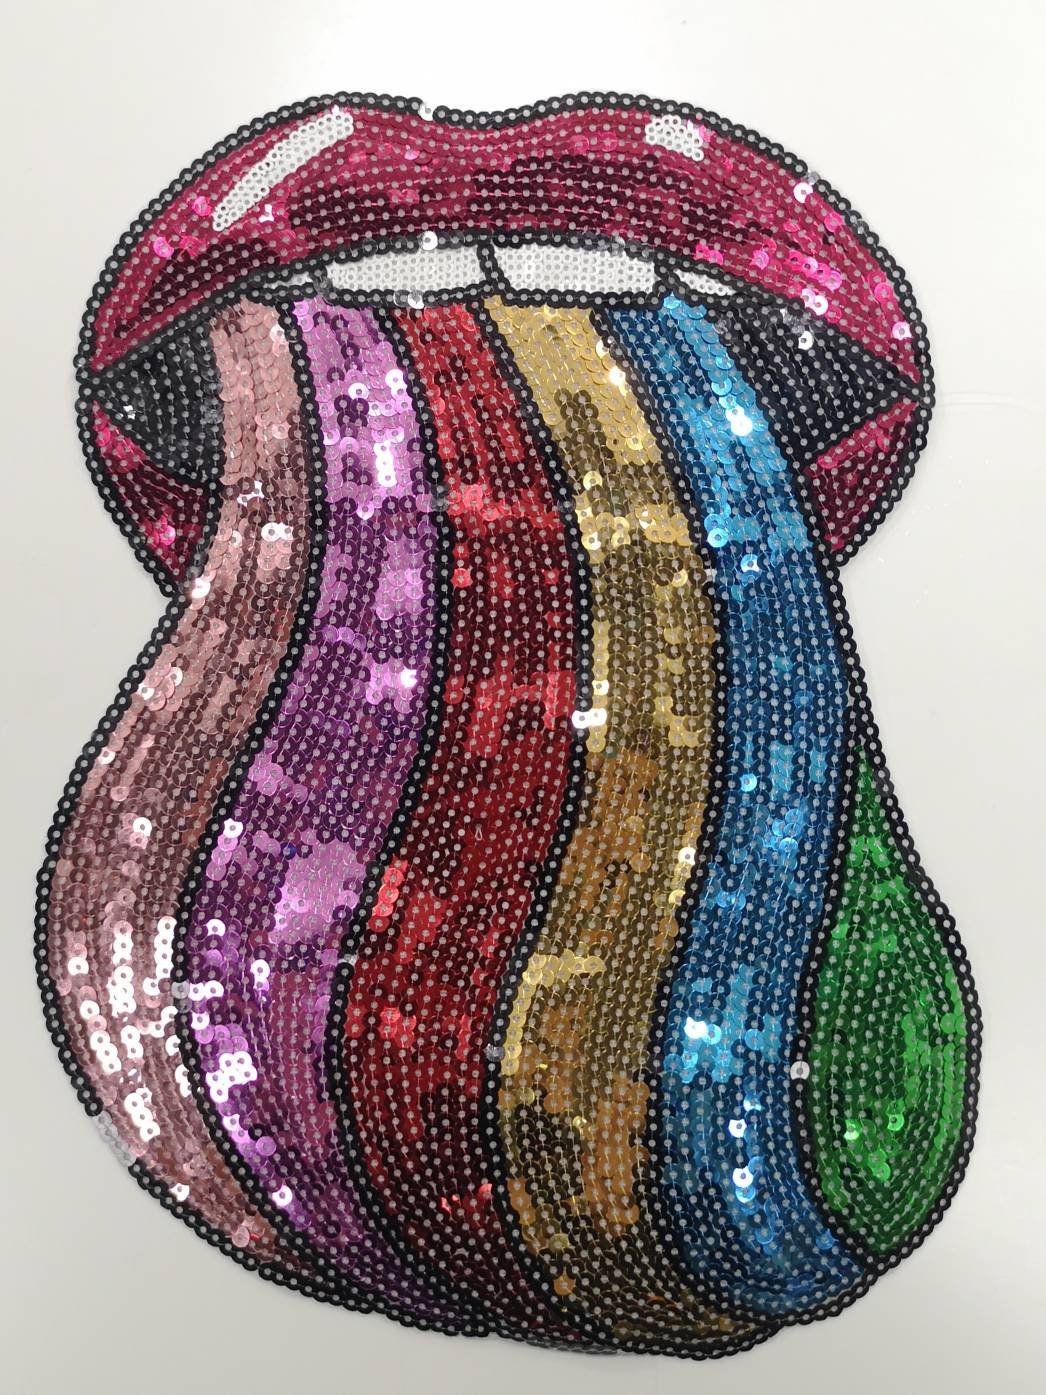 NEW Sequins "Taste of Color" Red Lip & Tongue Patch (iron-on) Size 12", LARGE Patch for Denim Jacket, Shirts, Hoodies, Camo, and More, DIY